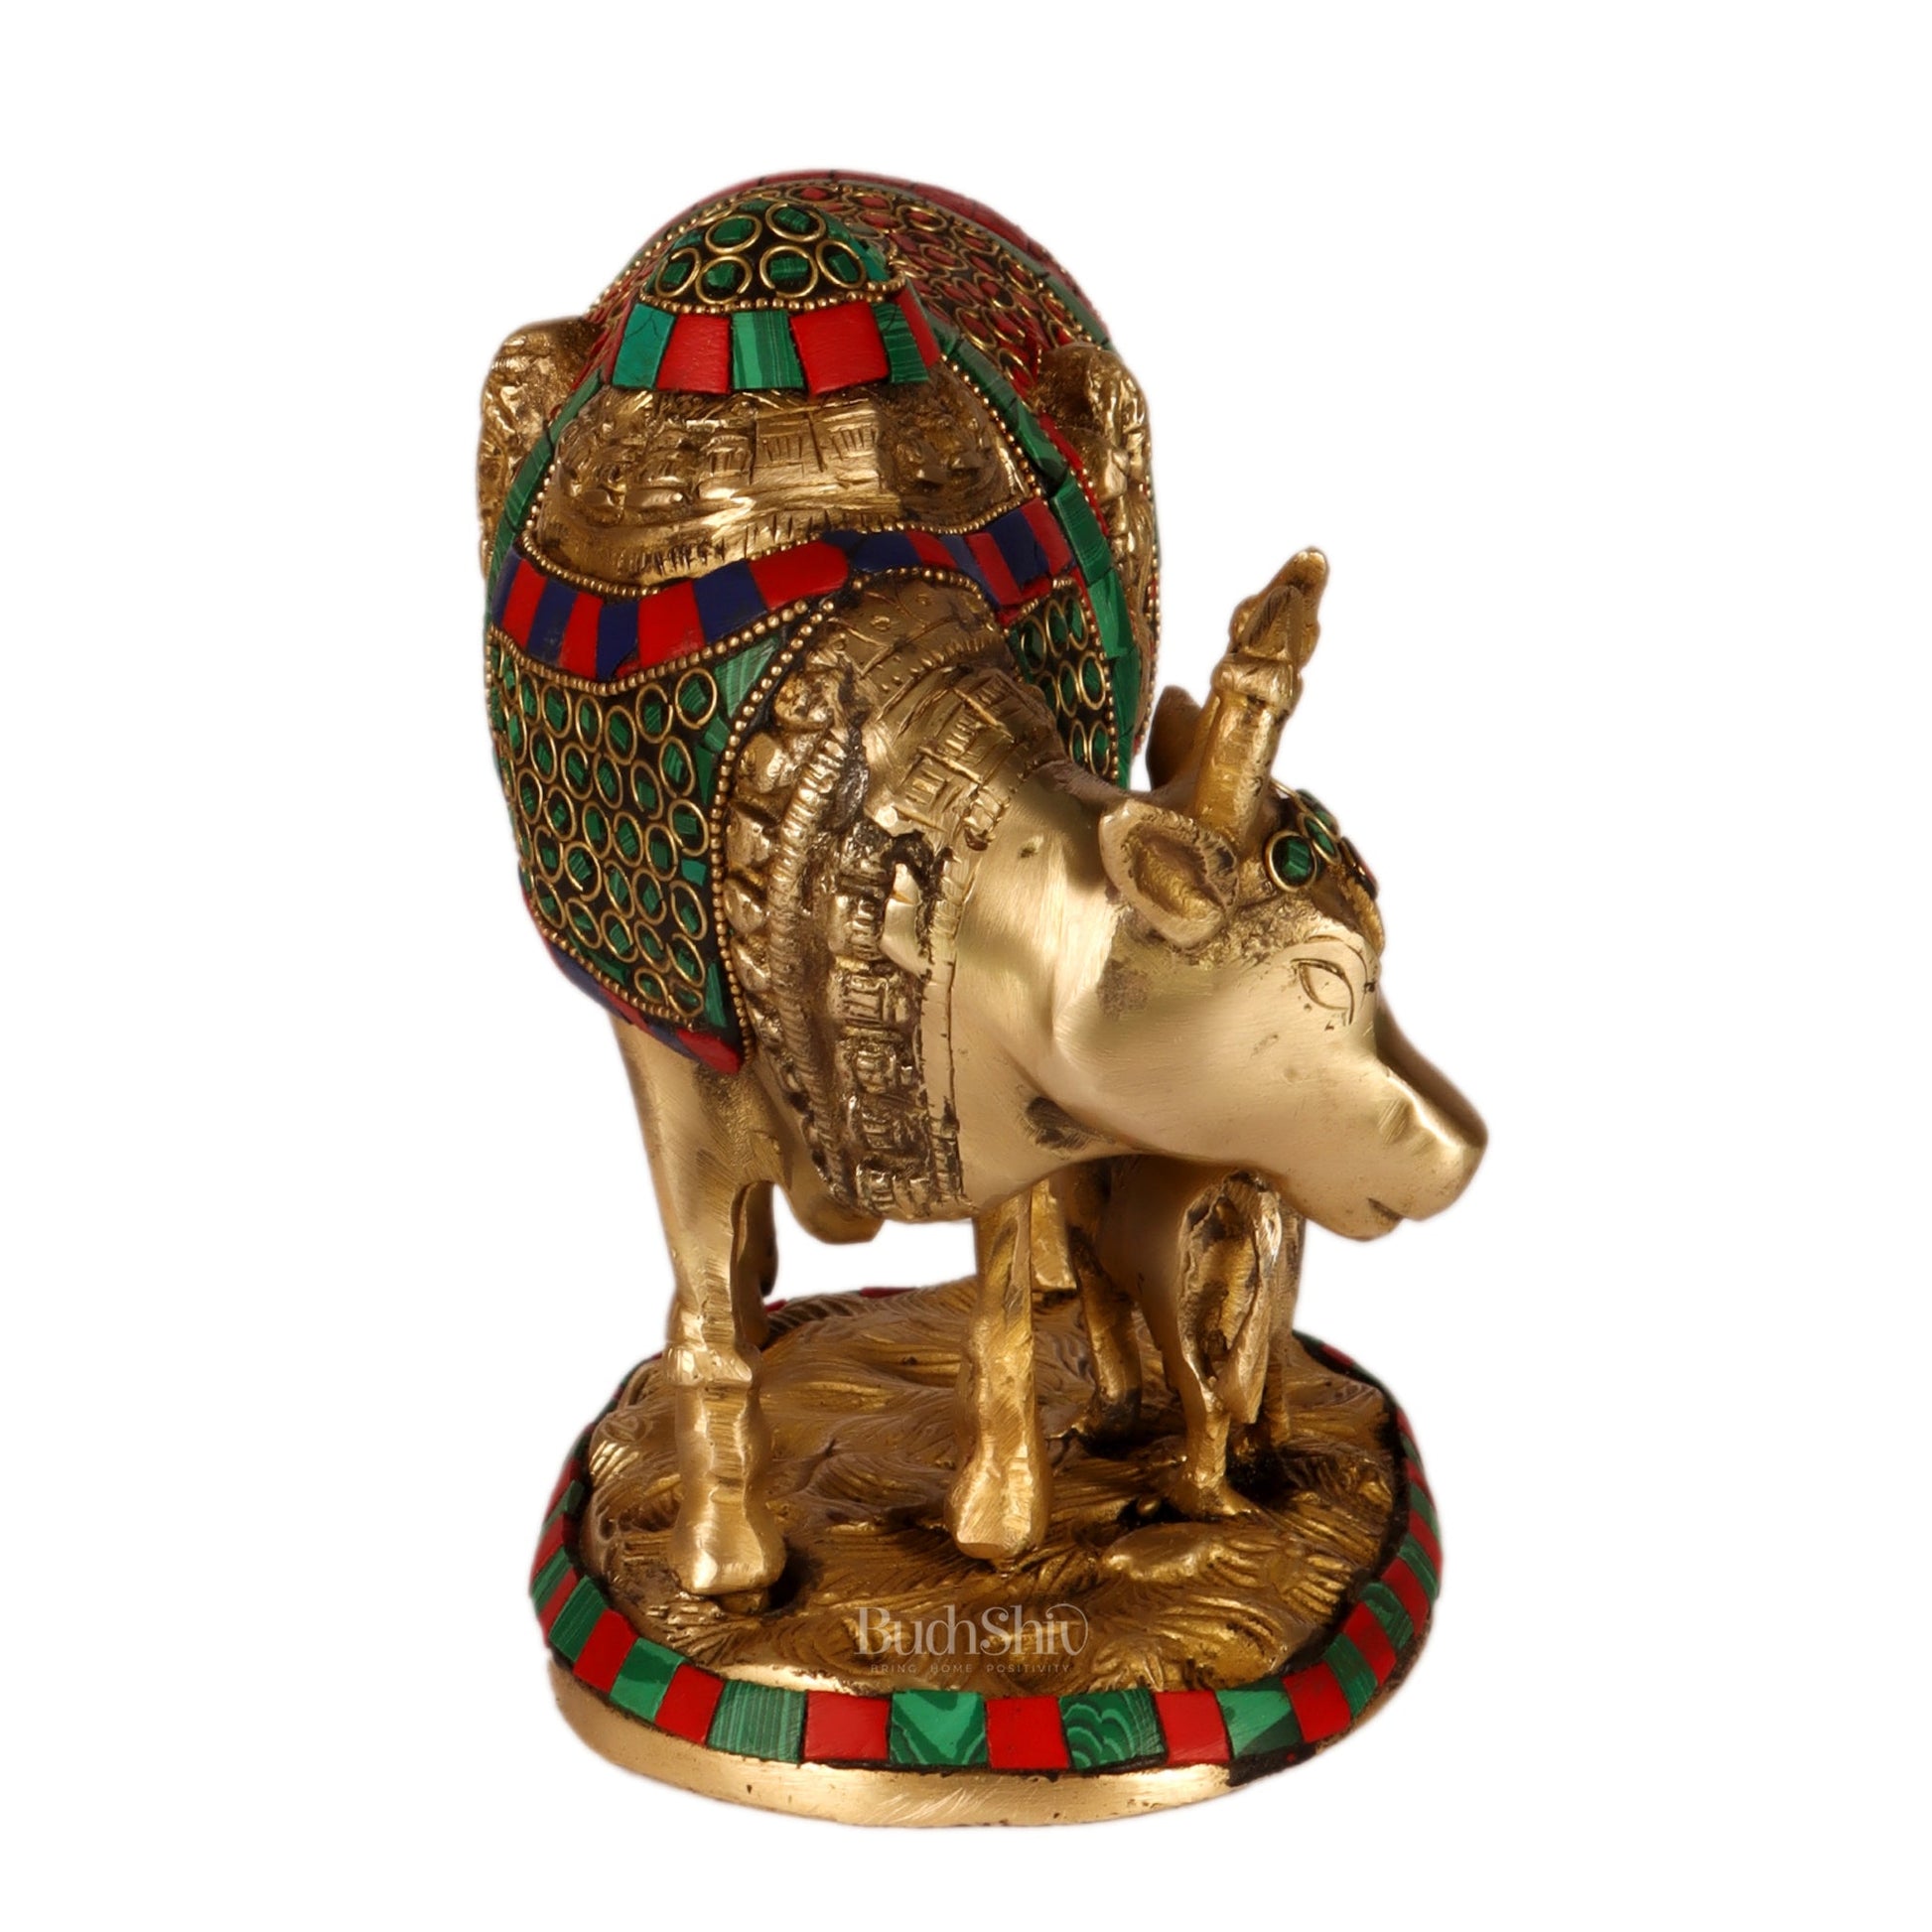 Handcrafted Brass Cow and Calf Statue | Ganesha and Lakshmi Carvings 8.5" - Budhshiv.com